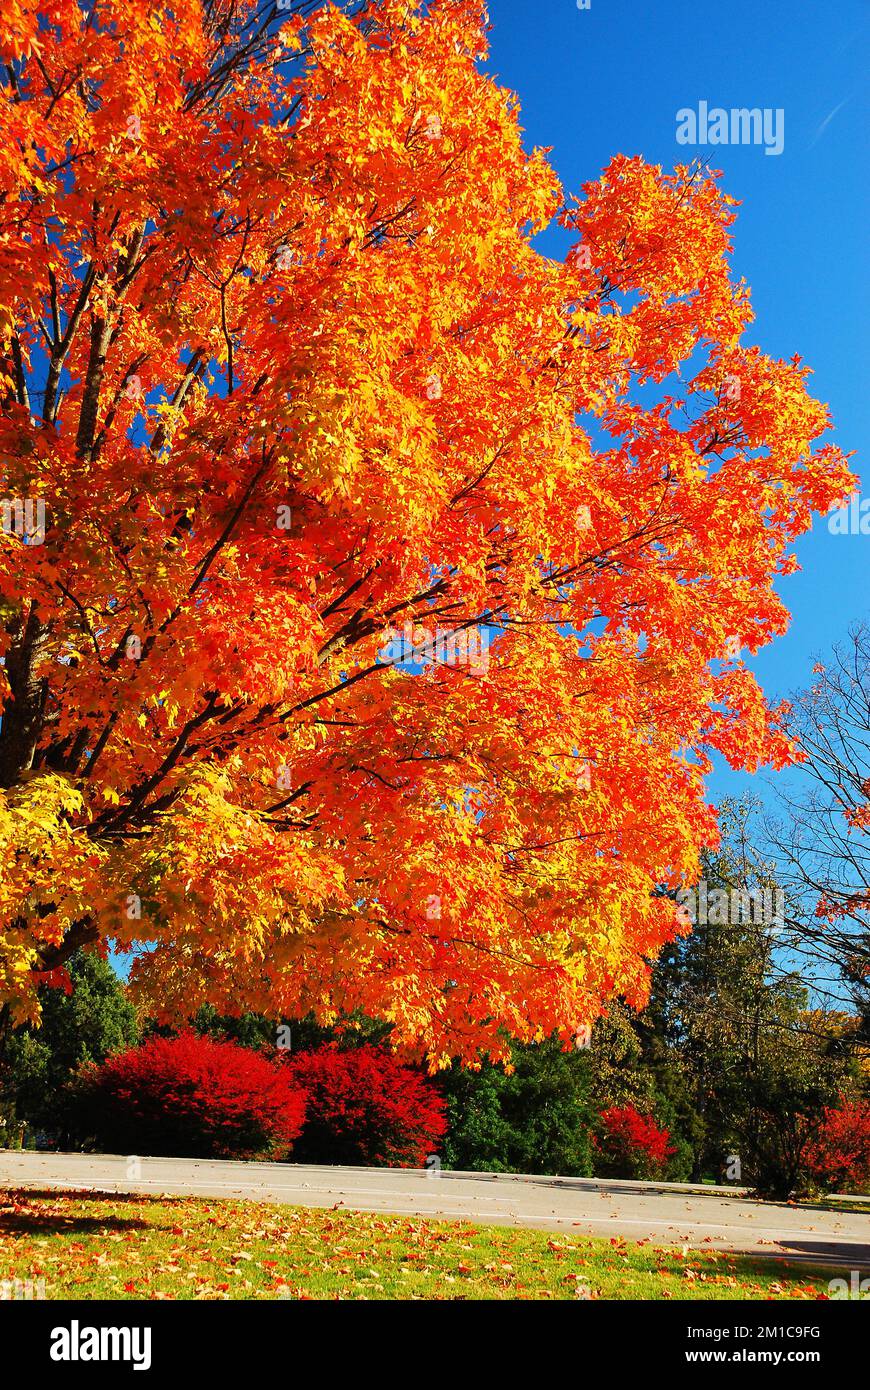 A fall sugar maple tree showcases its bold orange, red and yellow foliage colors on the leaves in autumn Stock Photo